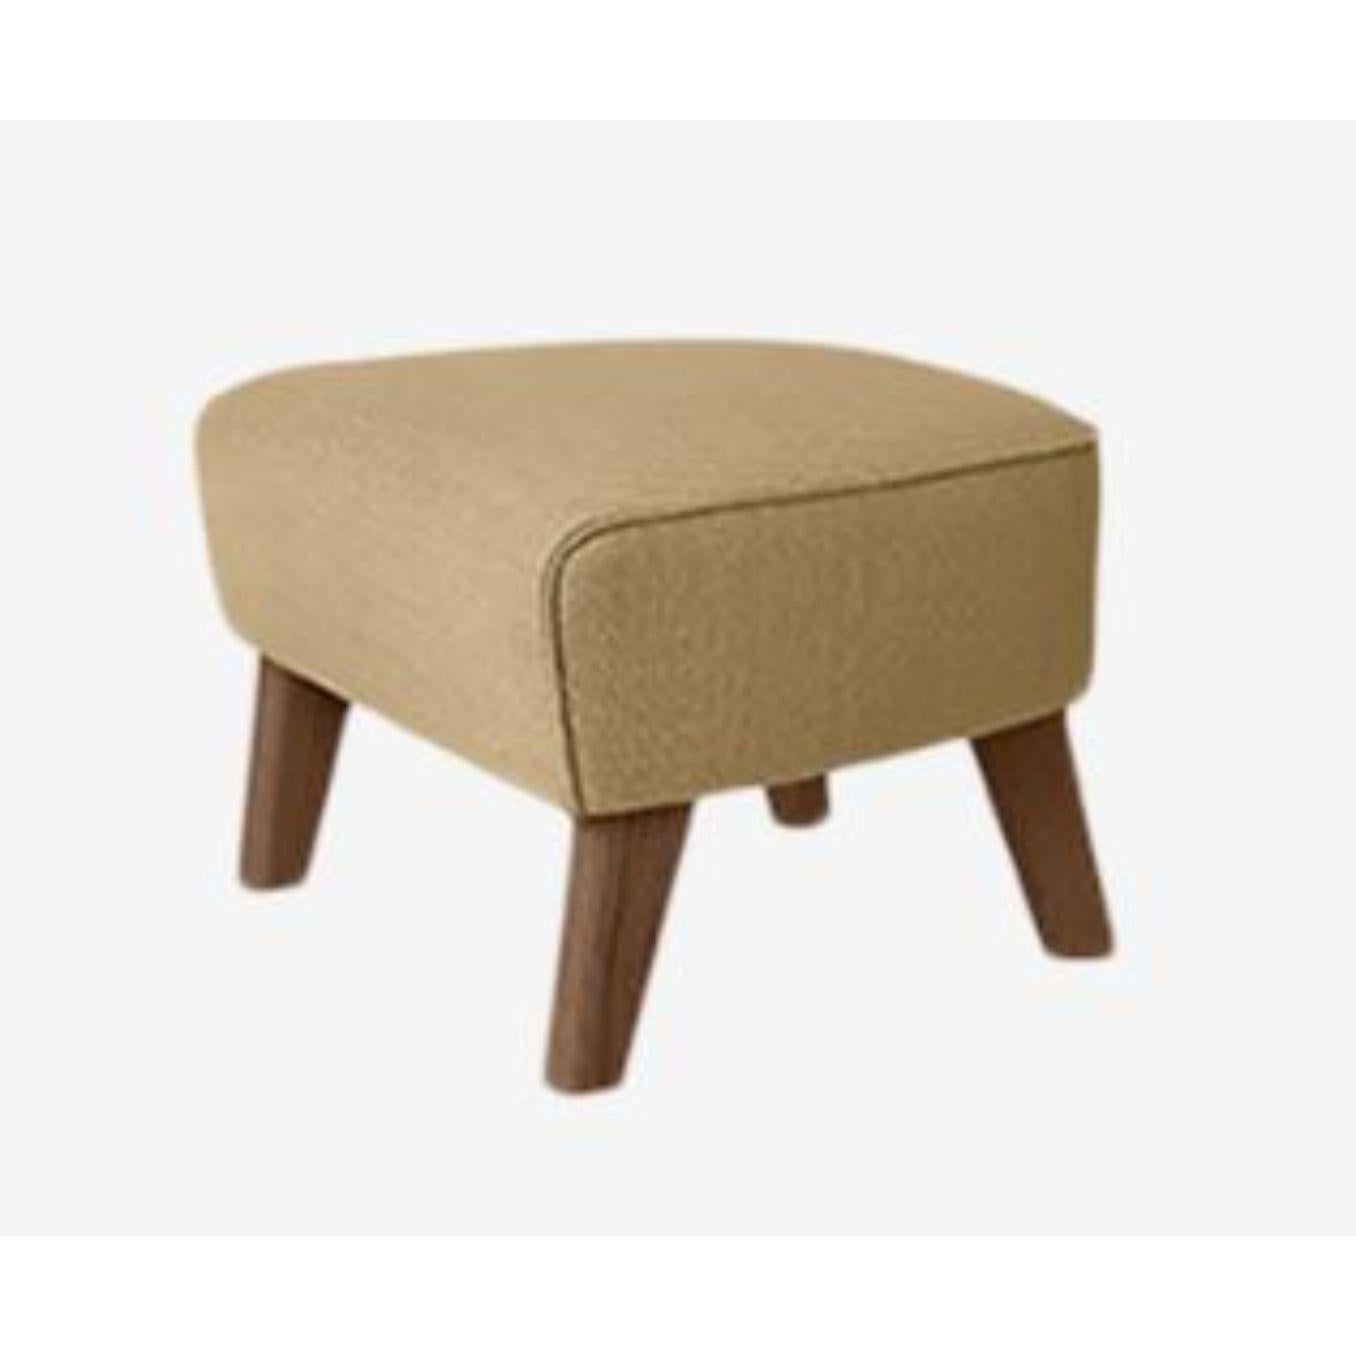 323 Raf Simons Vidar 3 my own chair footsool by Lassen
Dimensions: D 58 x W 56 x H 40 cm 
Materials: textile, smoked oak, 
Also available in different colors and materials. 
Weight: 18 Kg

The My Own Chair Footstool has been designed in the